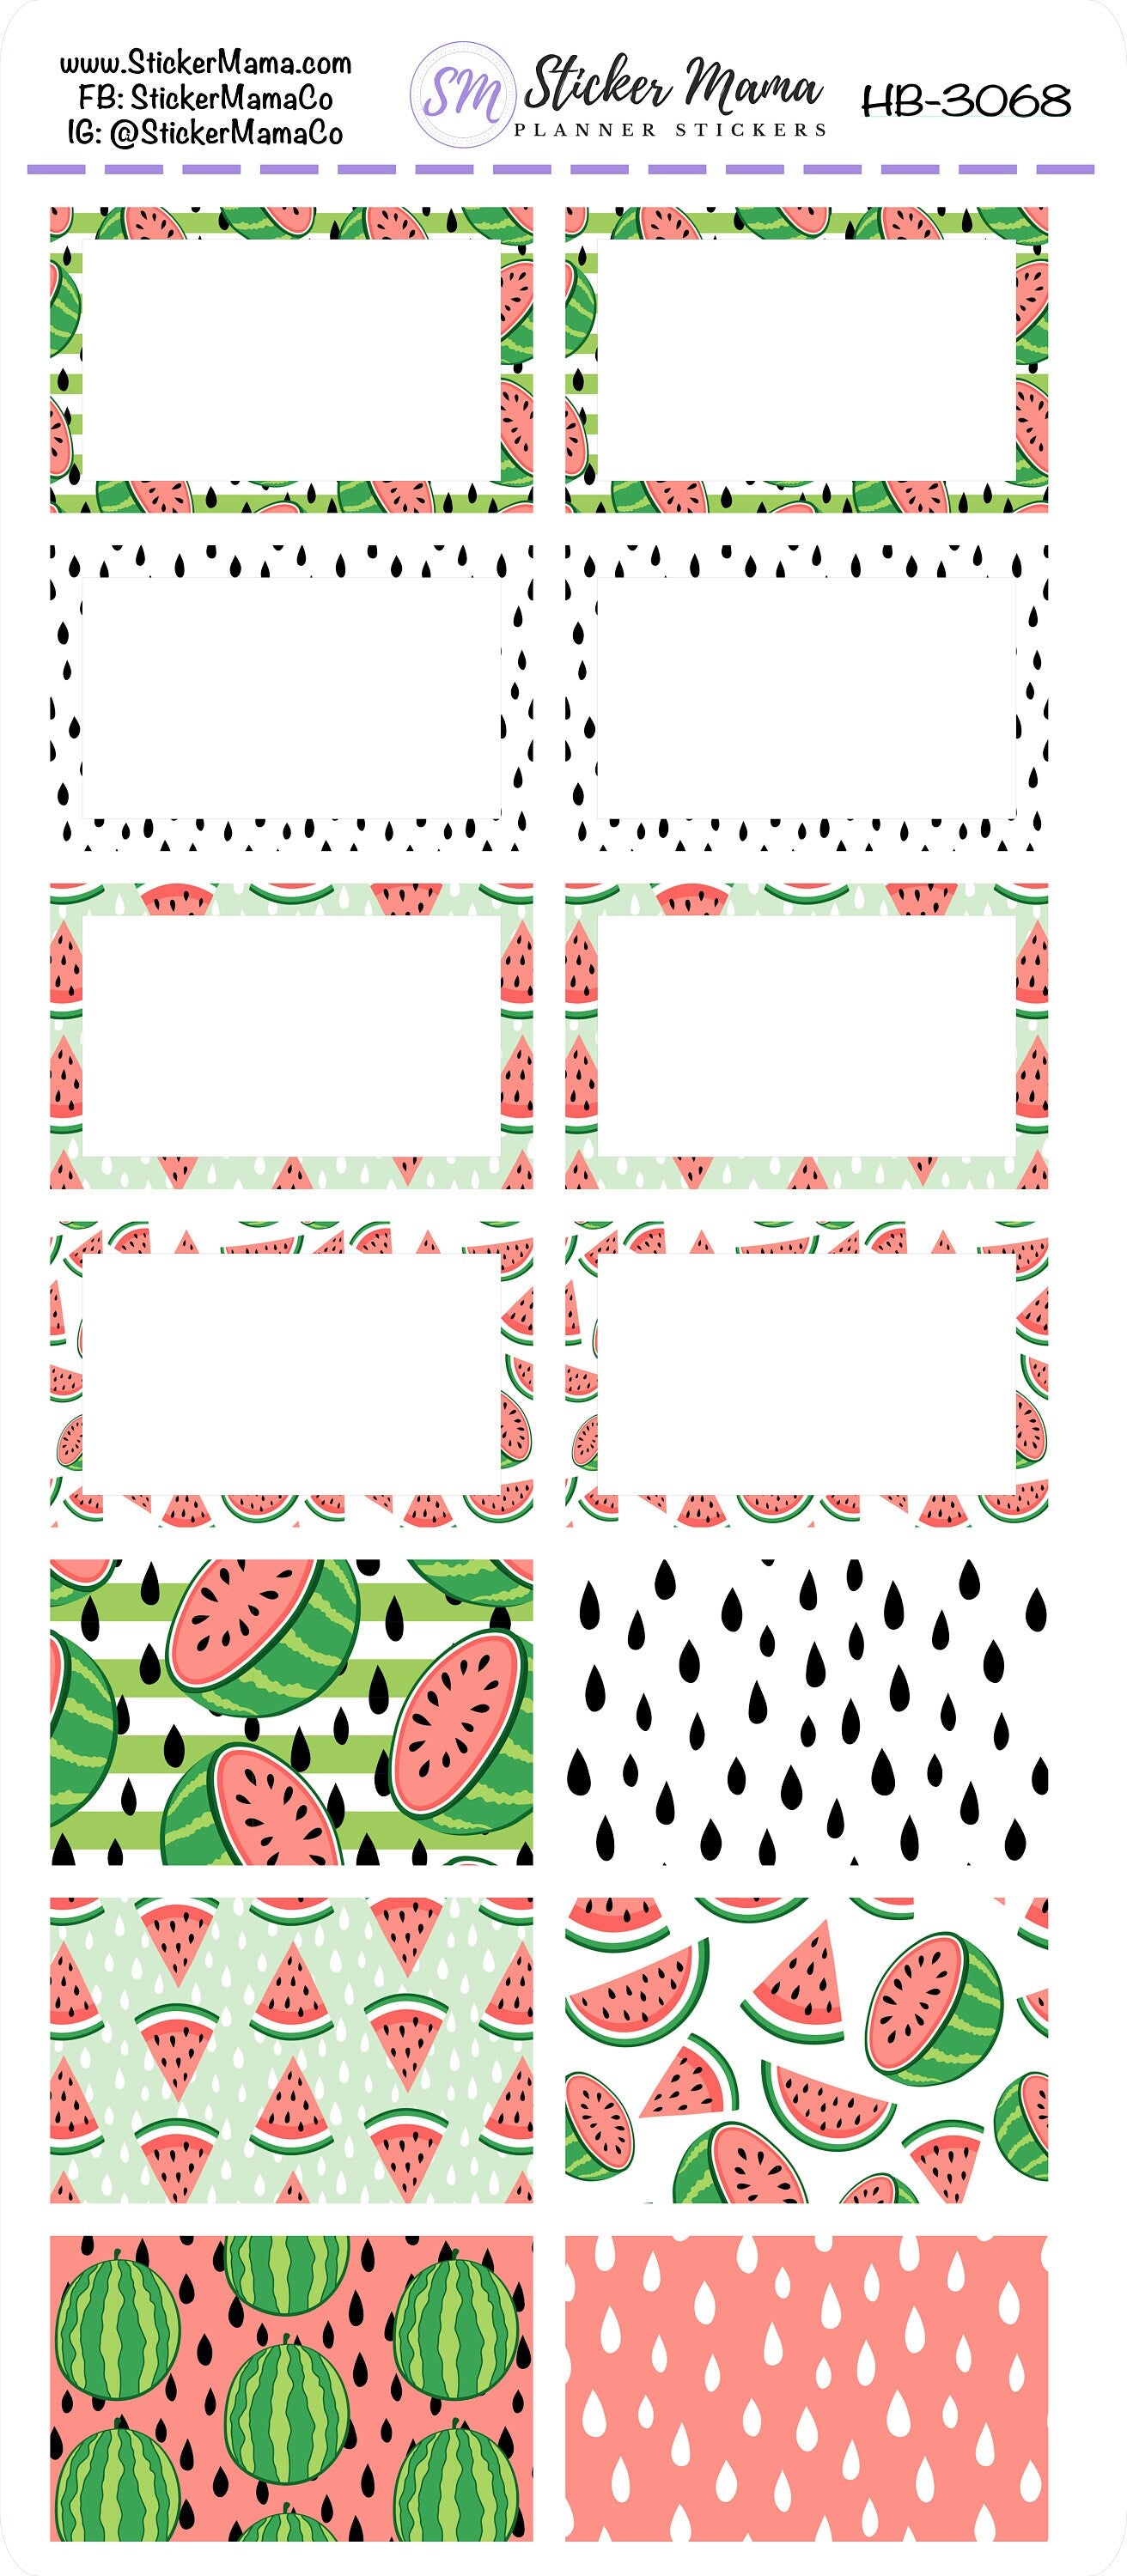 BL-3068 - HB-3068 BASIC Label Stickers - Watermelon - Half Boxes - Planner Stickers - Full Box for Planners